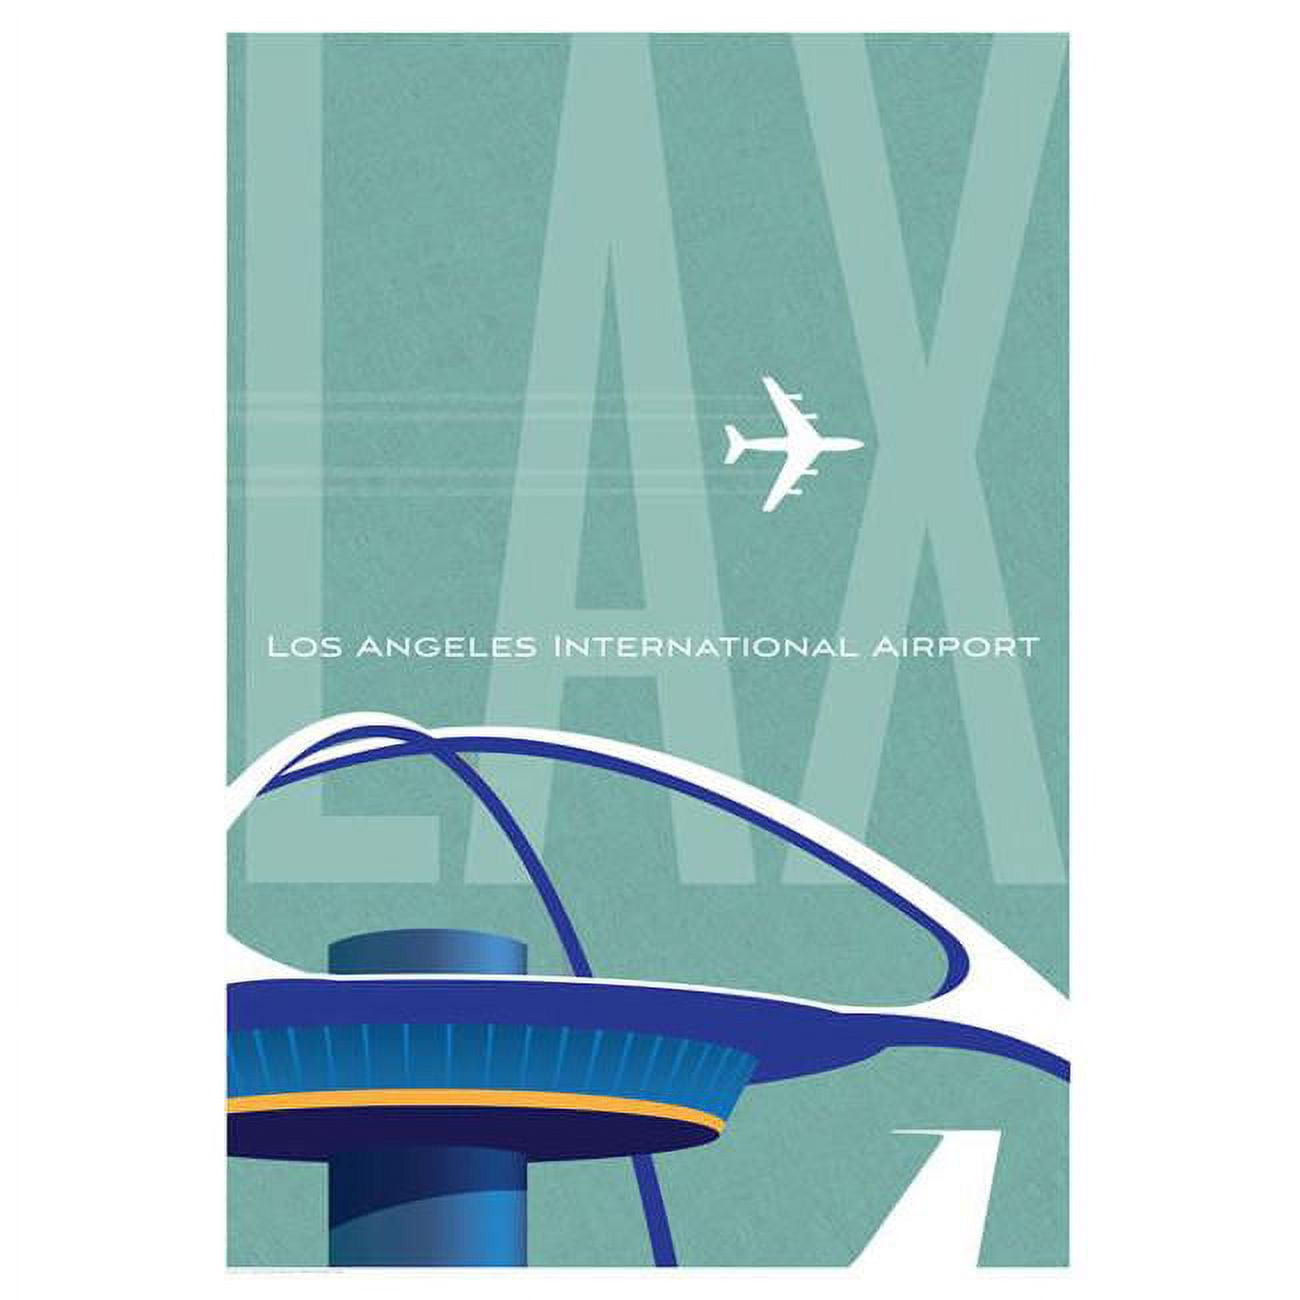 Picture of Jetage Aviation Art JA023 14 x 20 in. Lax Los Angeles Airport Poster